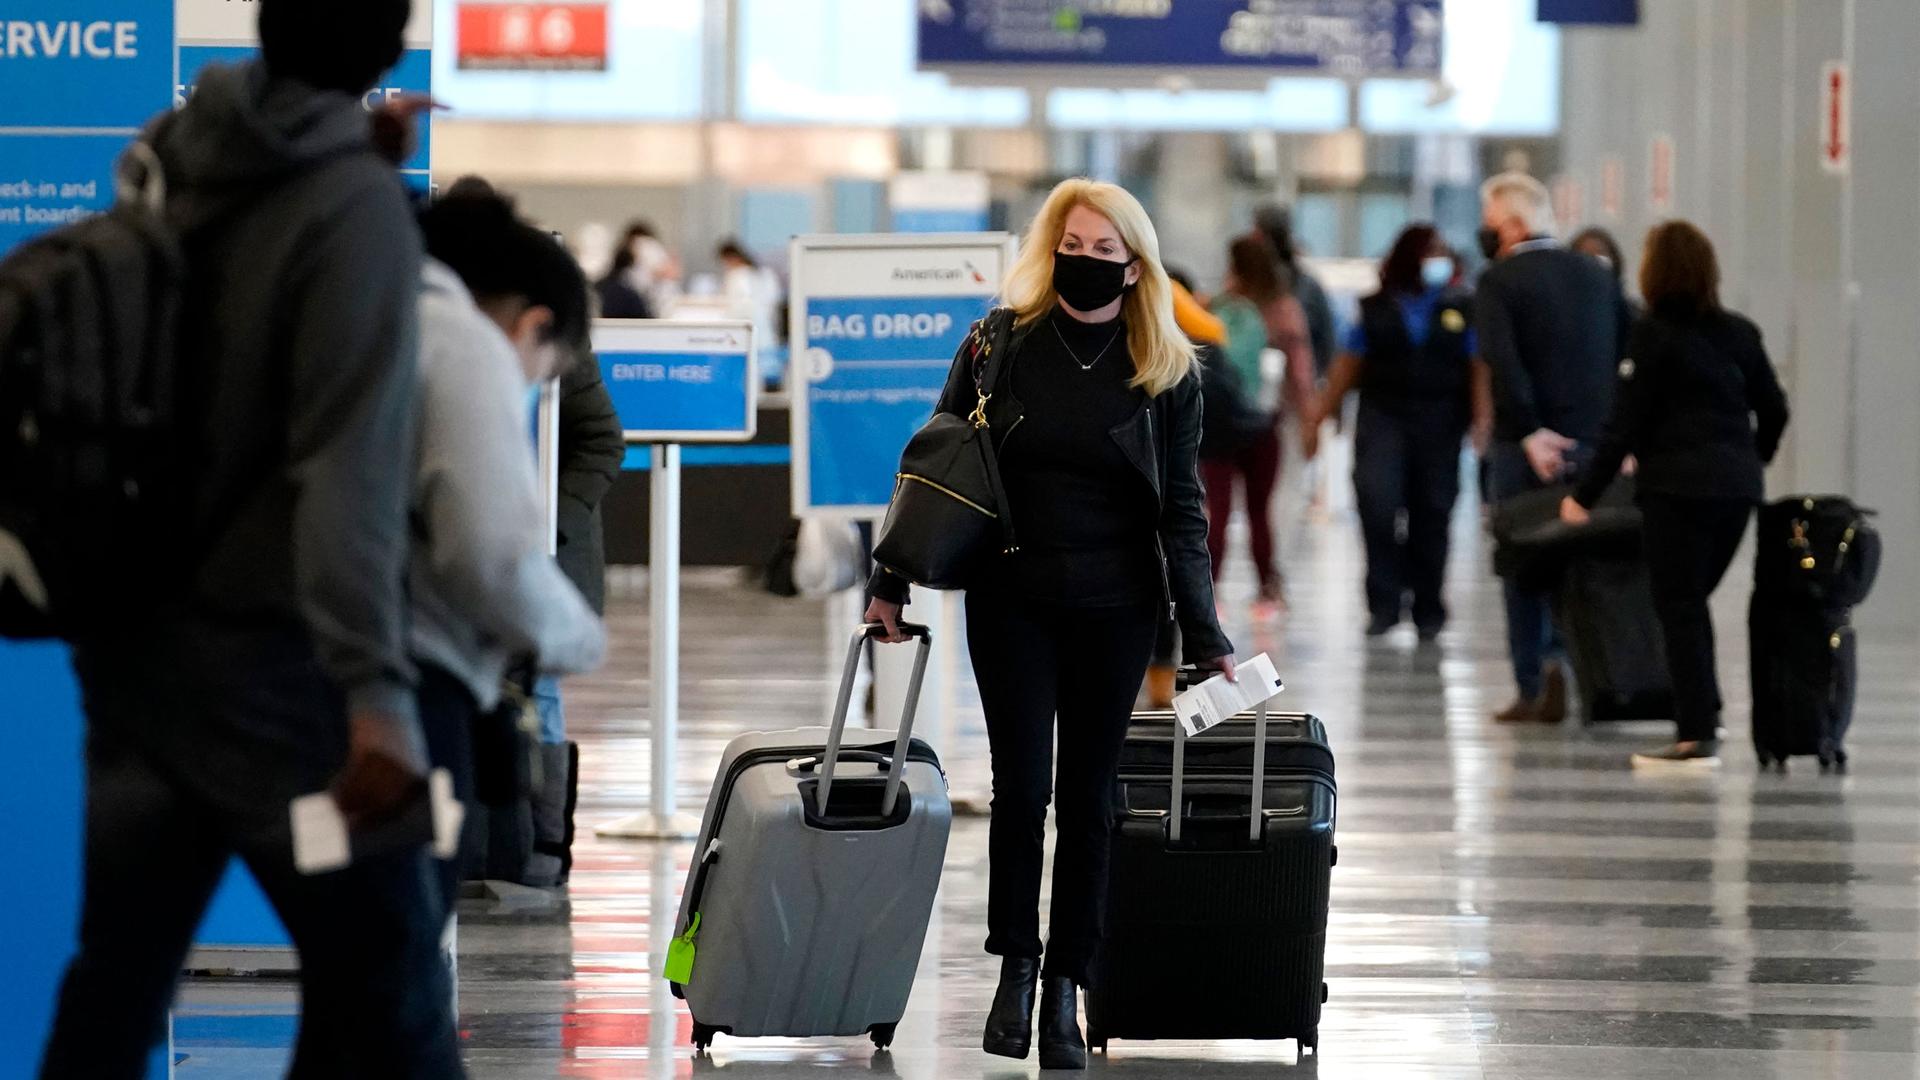 A woman is shown center frame pulling two rollaboard suitcases while wearing a face mask.